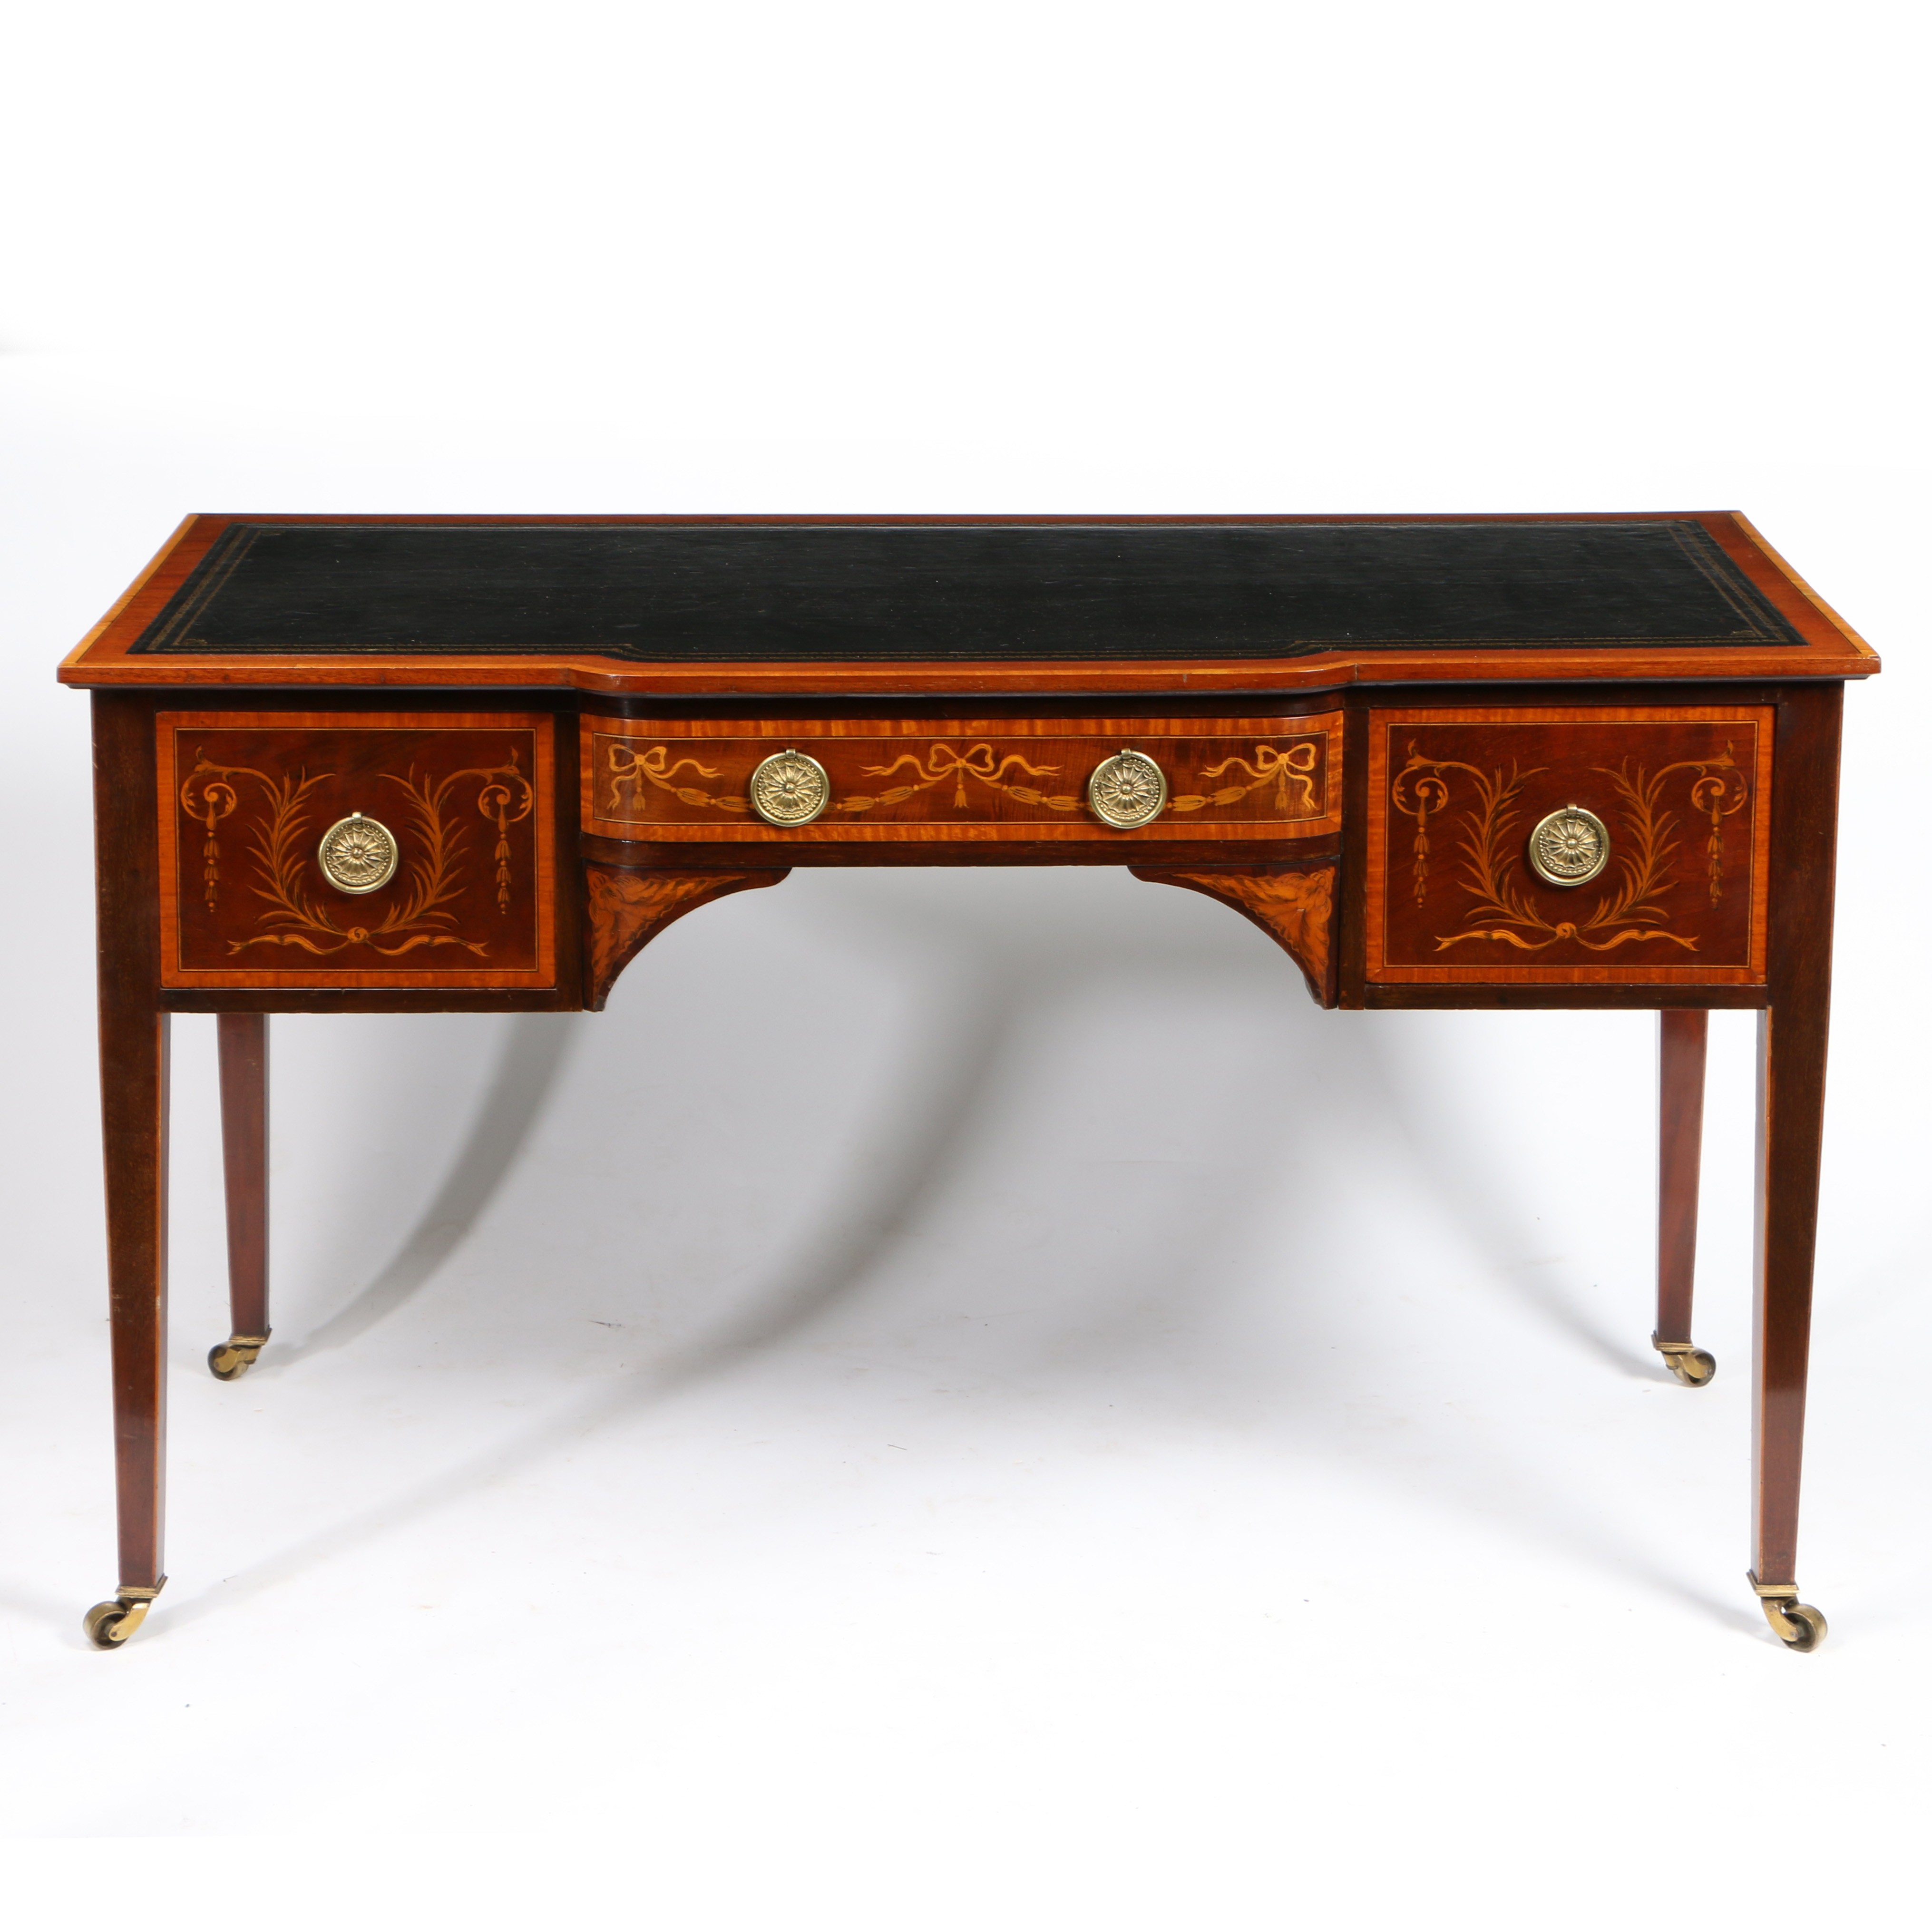 A 19TH CENTURY MAHOGANY AND SATINWOOD INLAID WRITING DESK, IN THE MANNER OF EDWARDS AND ROBERTS. - Image 2 of 4